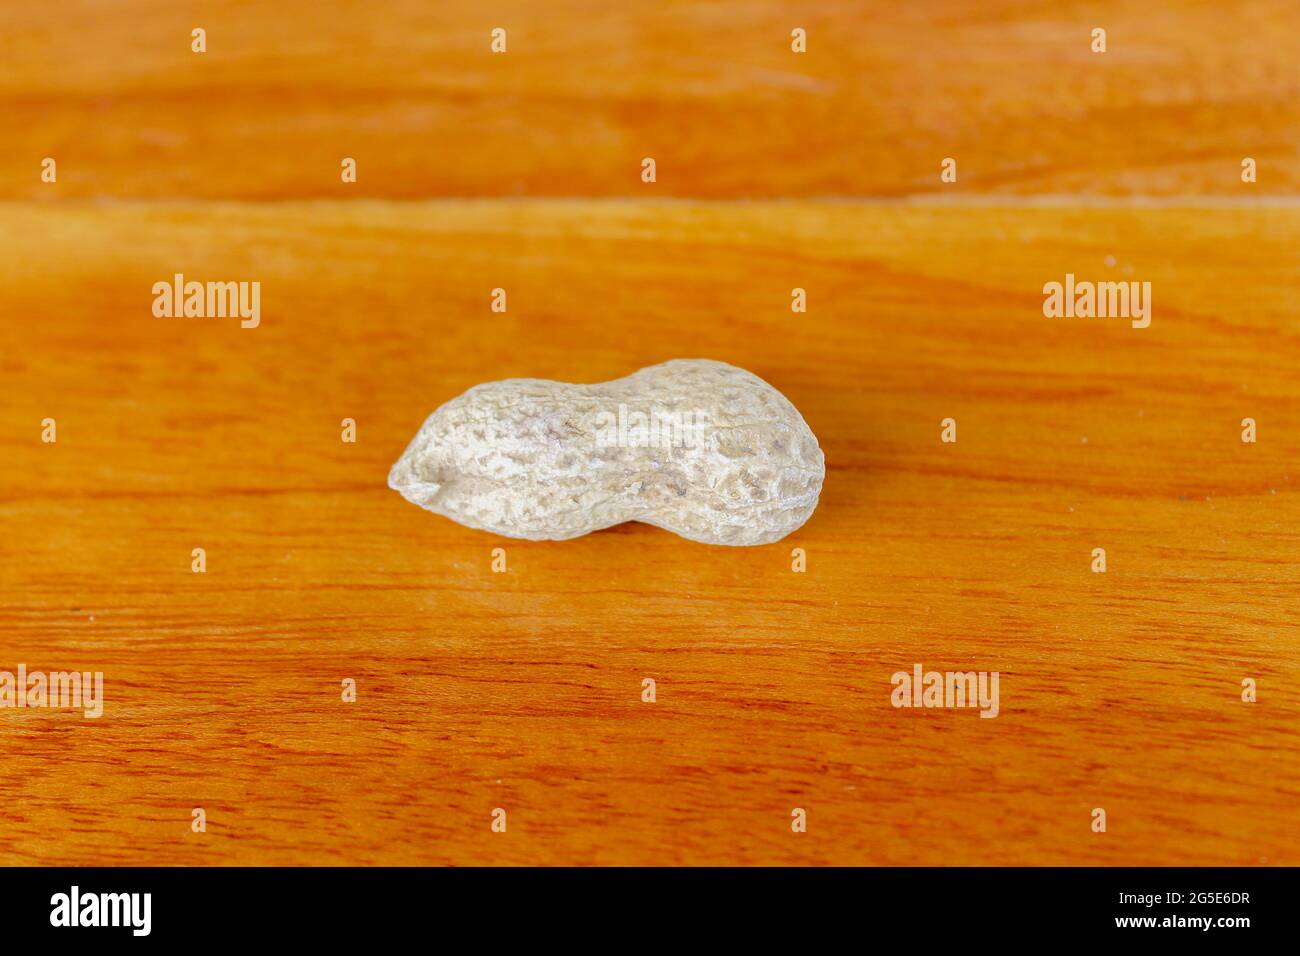 Peanuts on a wooden table. A peanut is placed on a wooden table overlooking the wood grain. Stock Photo